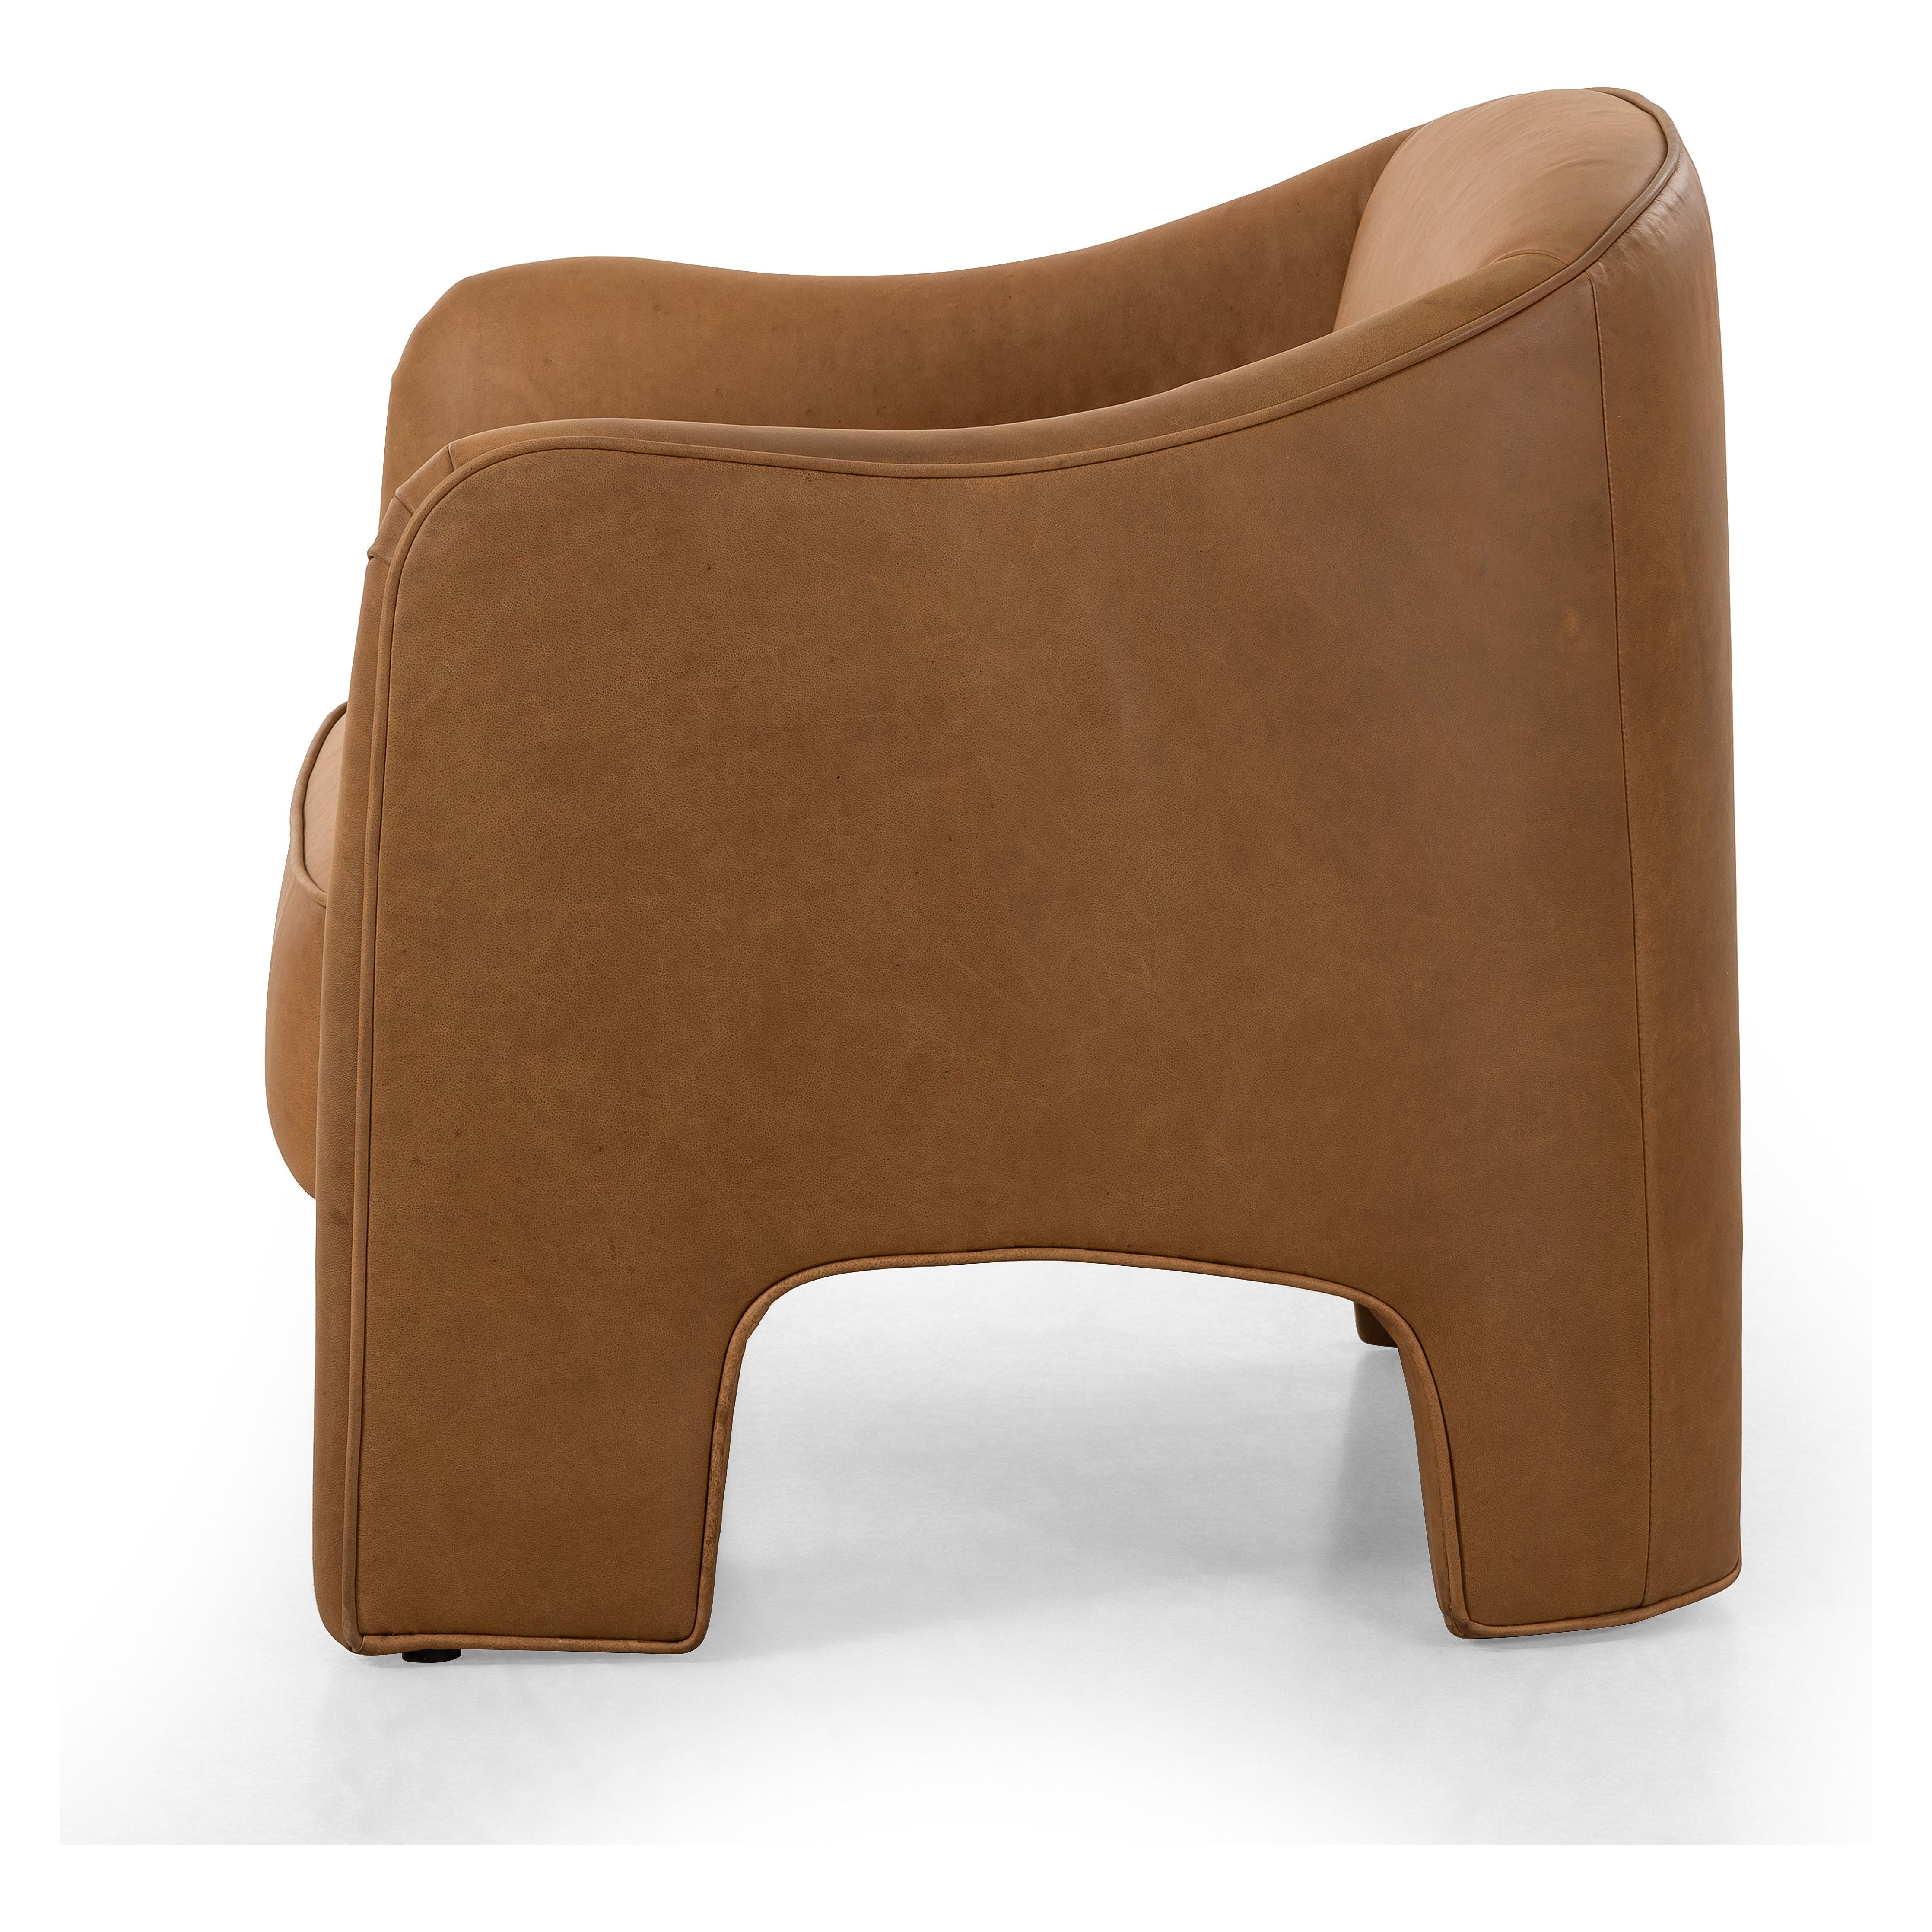 Shape-driven and sustainably made, this modern accent chair is upholstered in carbon neutral, vegetable-tanned leather processed using naturally fallen eucalyptus leaves in Uruguay. S-spring construction ensures a supportive sit, while side cutouts catch the eye. Amethyst Home provides interior design, new construction, custom furniture, and area rugs in the Kansas City metro area.